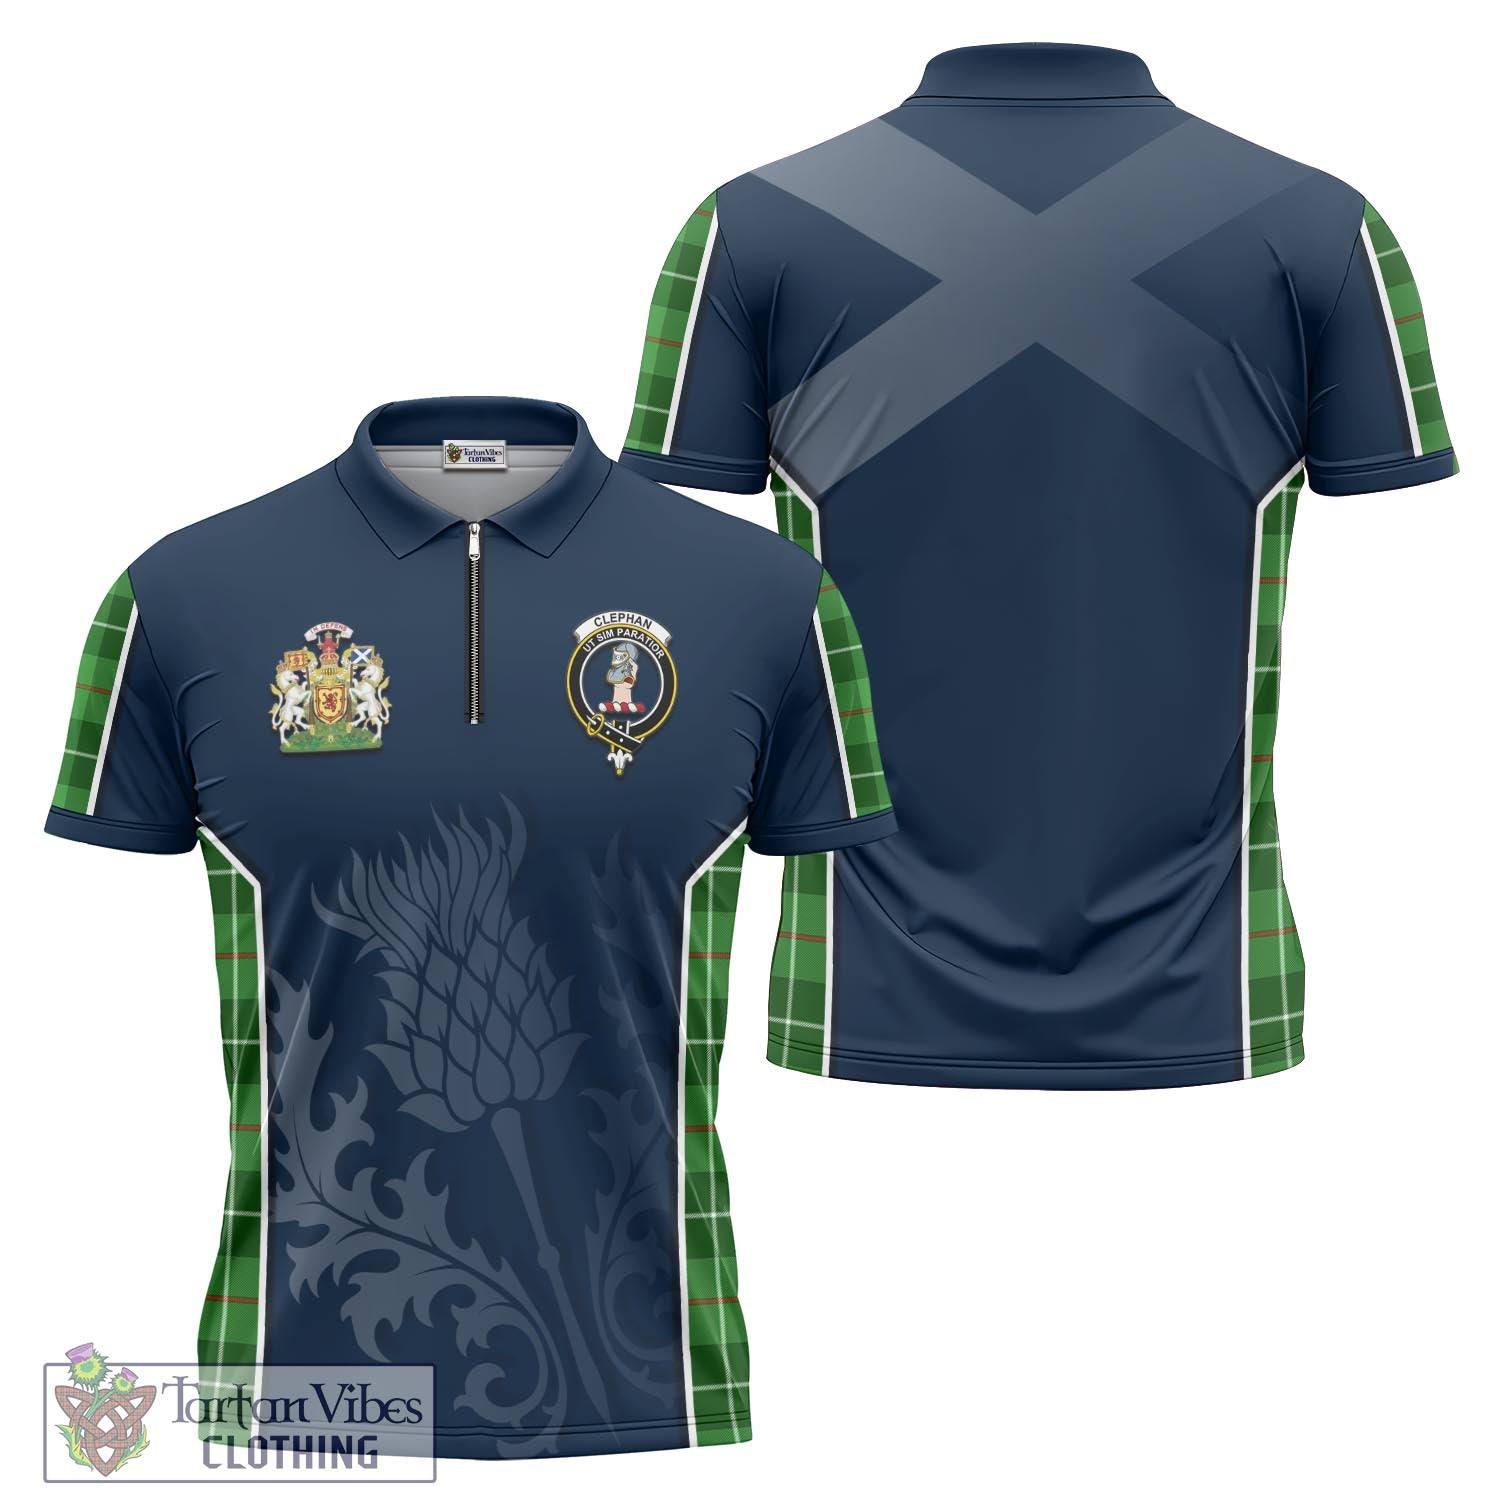 Tartan Vibes Clothing Clephan Tartan Zipper Polo Shirt with Family Crest and Scottish Thistle Vibes Sport Style